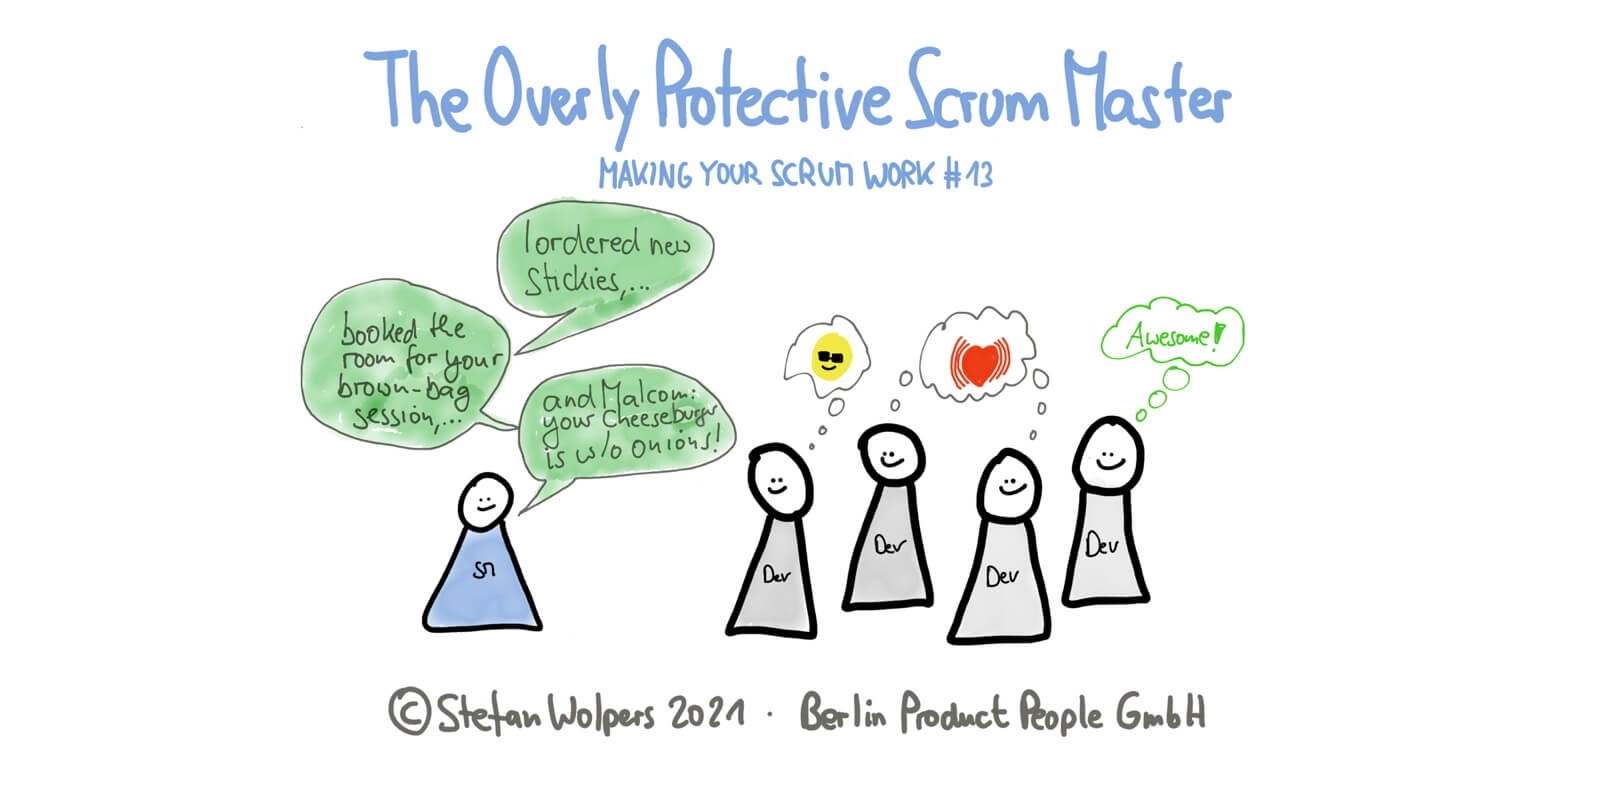 When the Scrum Master Fails by Being Overly Protective — Making Your Scrum Work